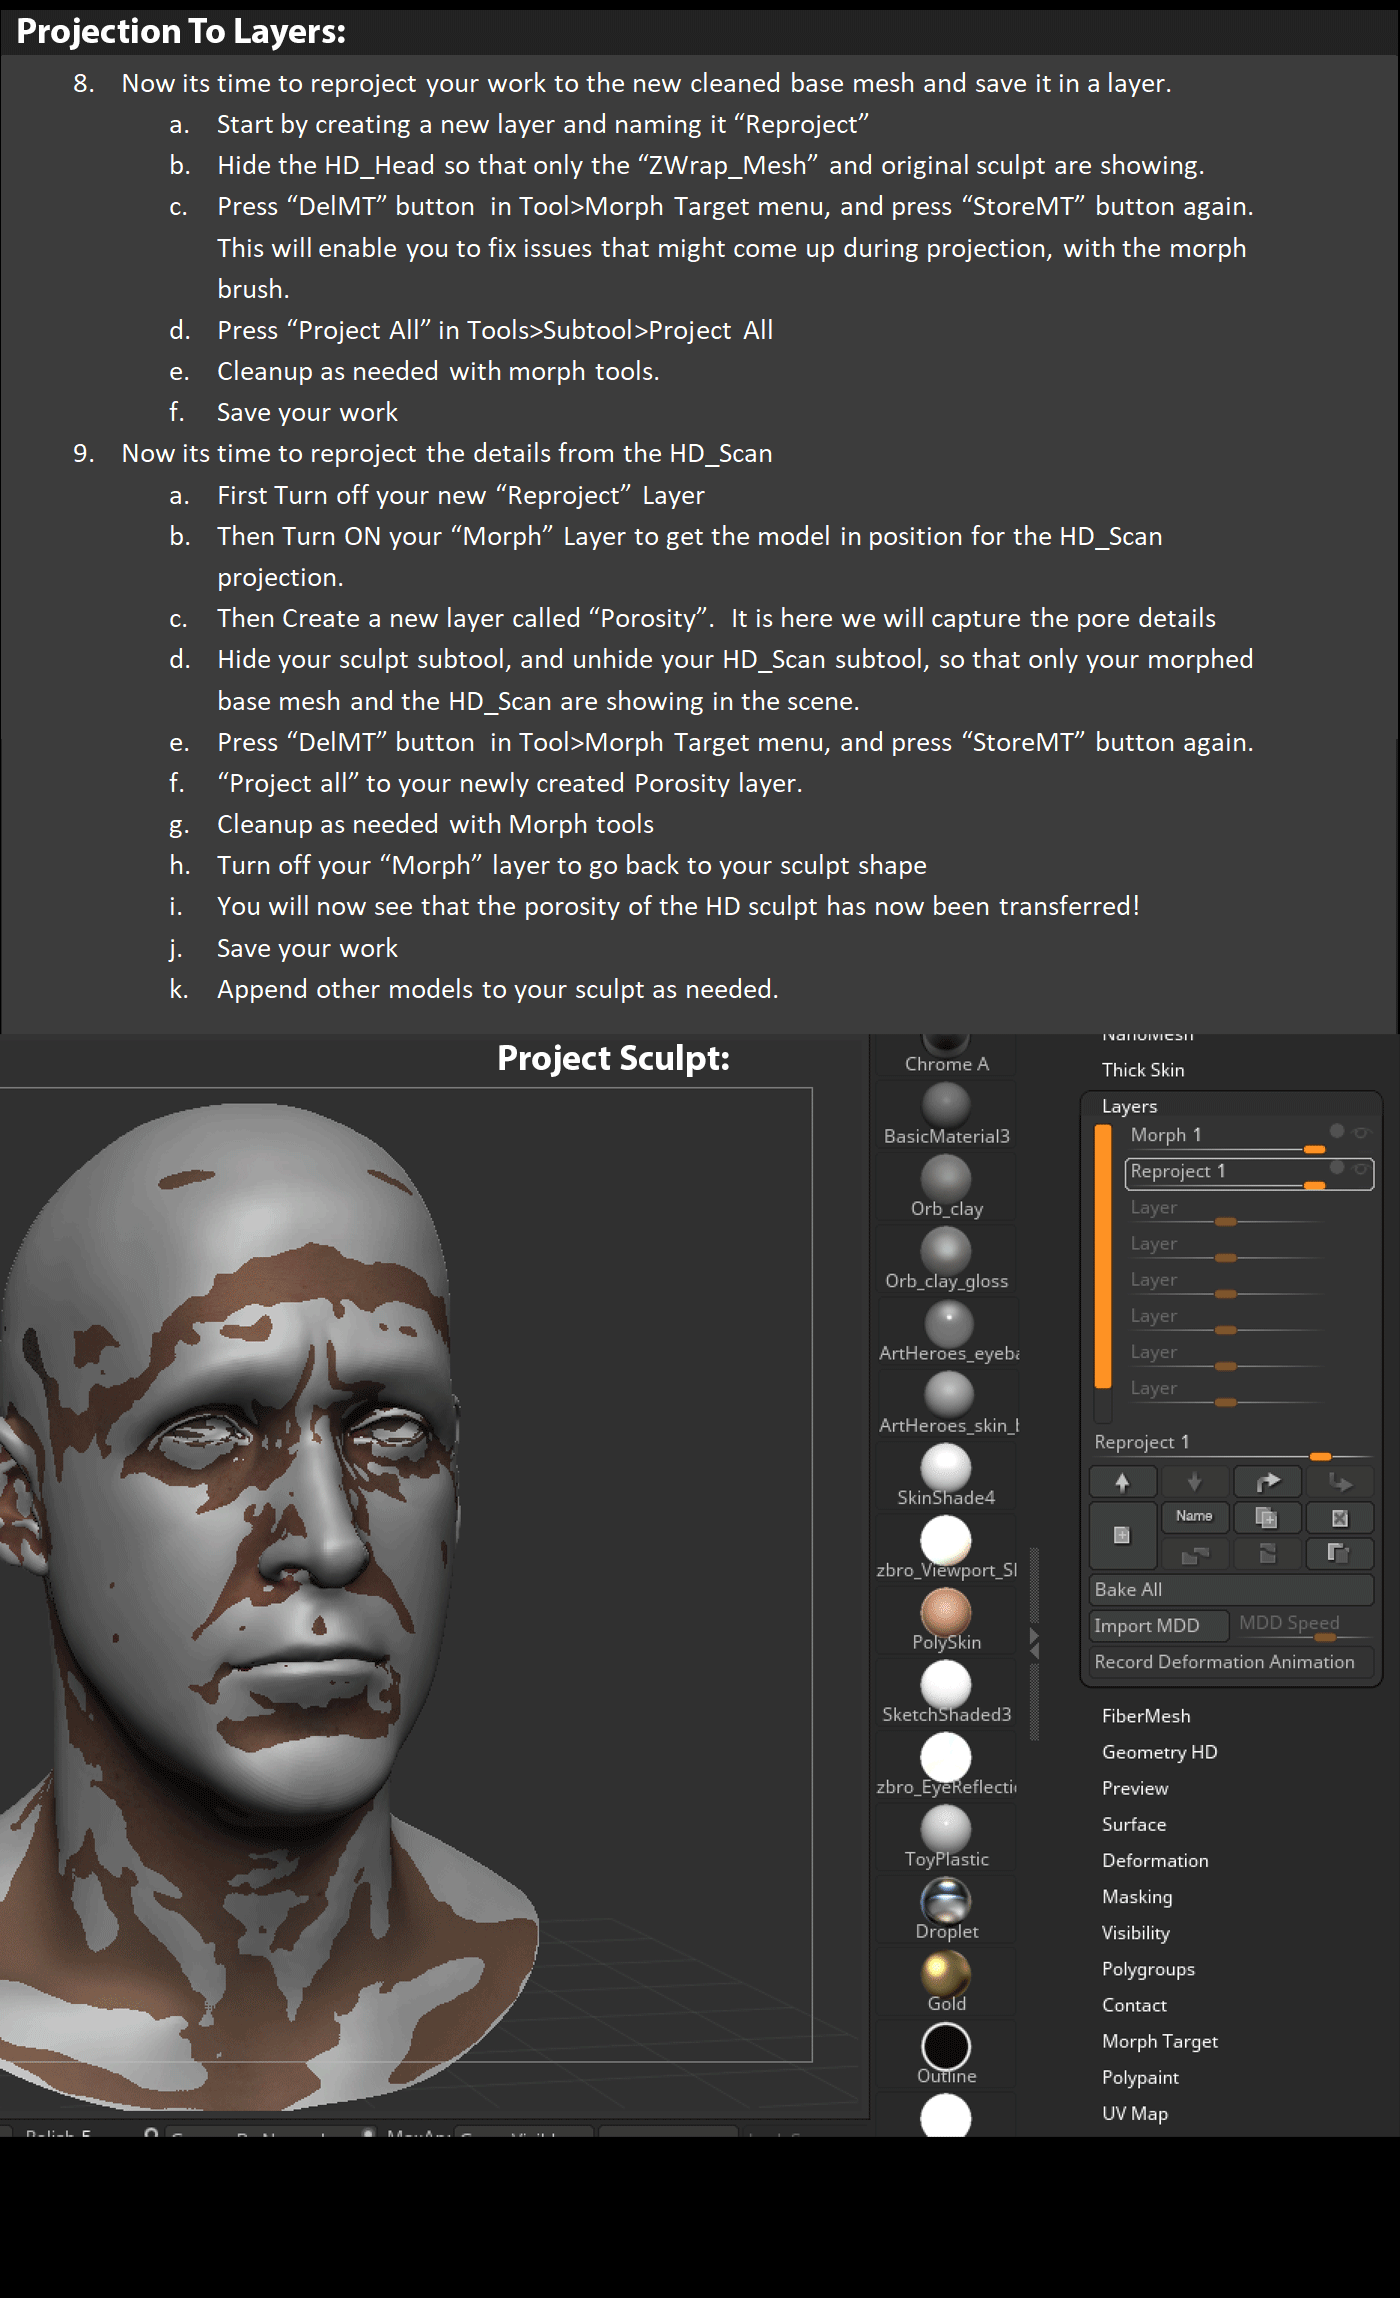 Project Sculpt to layer, and Project Scan to layer demo.